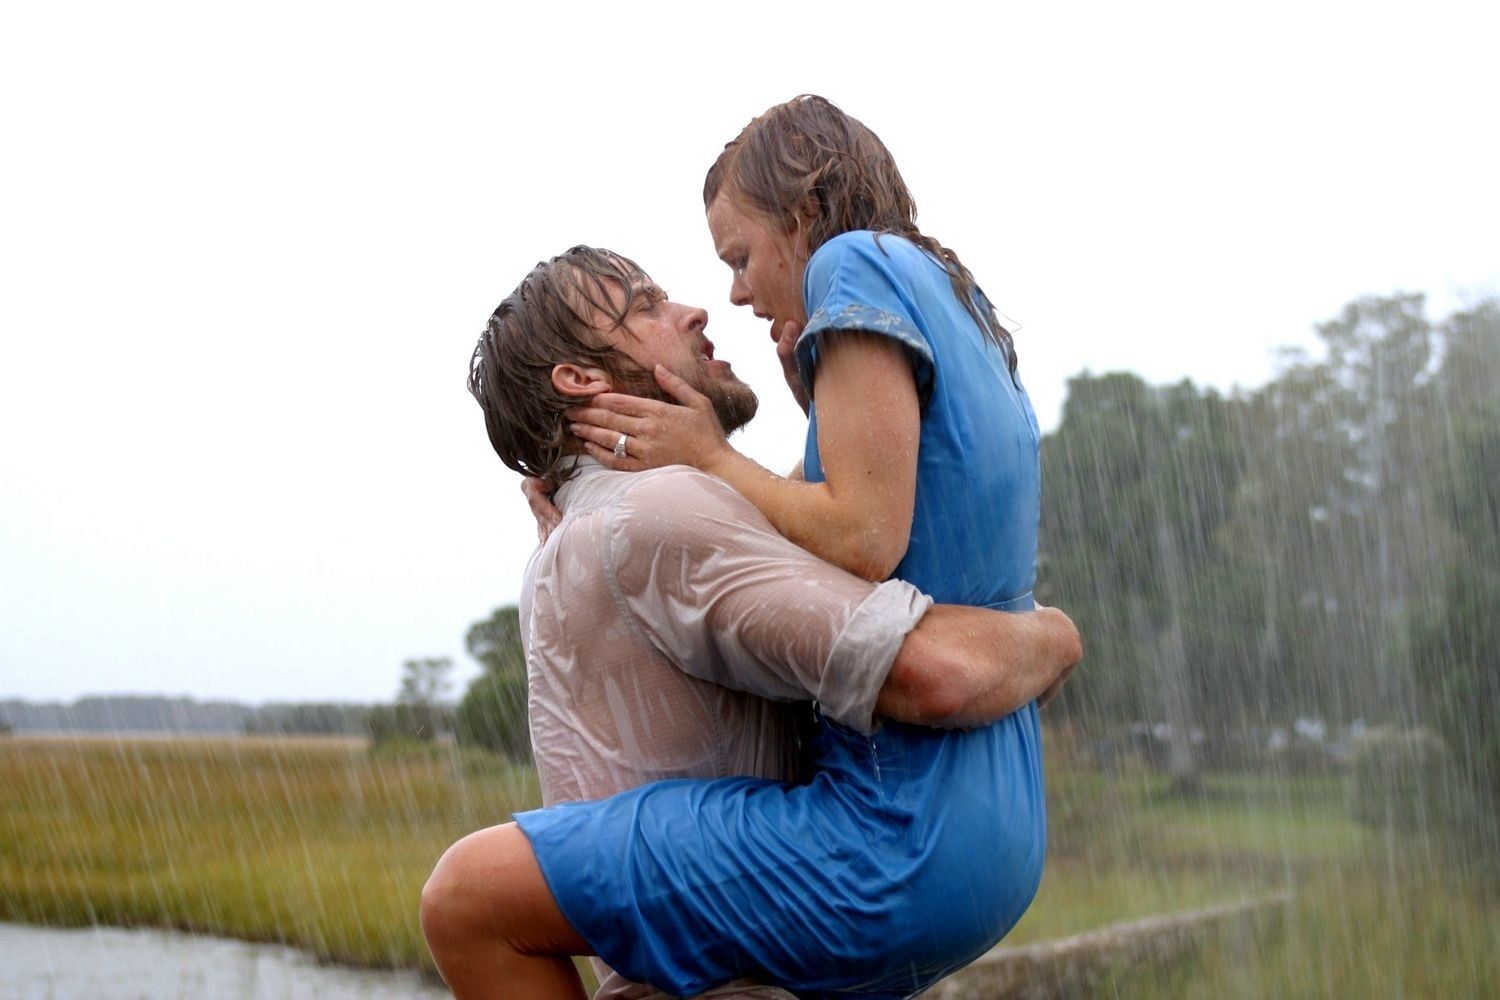 39 Sexy Movies to Watch With Your Bae - Sexiest Movies of All Time